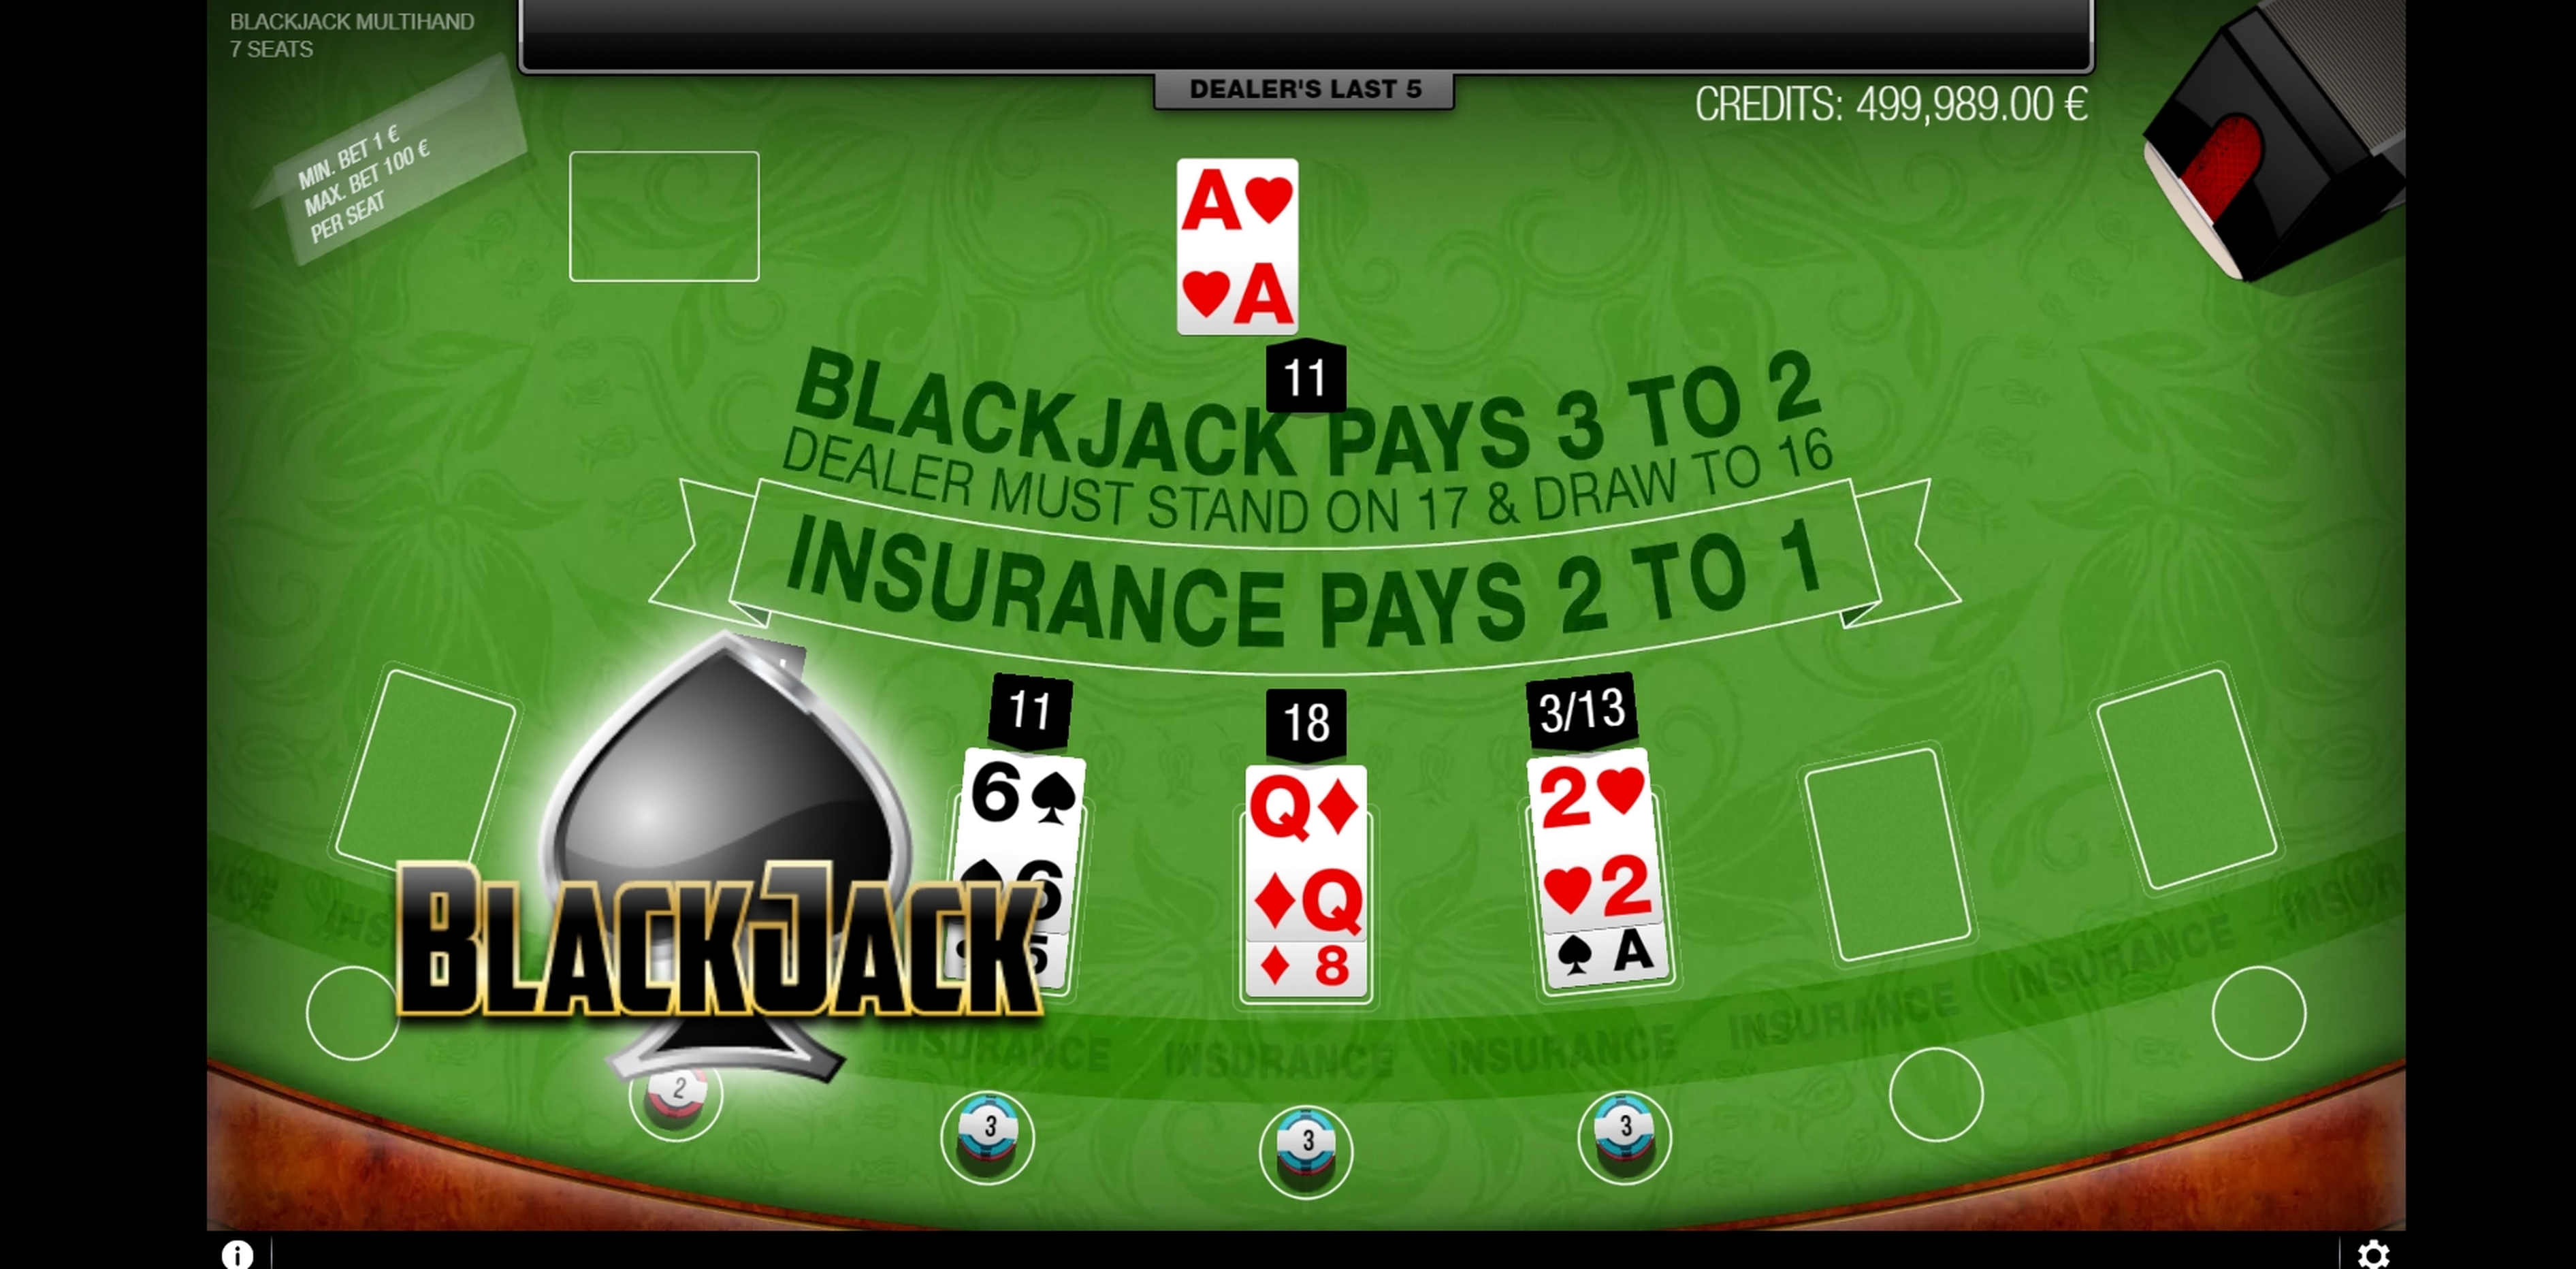 Win Money in Blackjack Multihand 7 Seats Free Slot Game by GAMING1